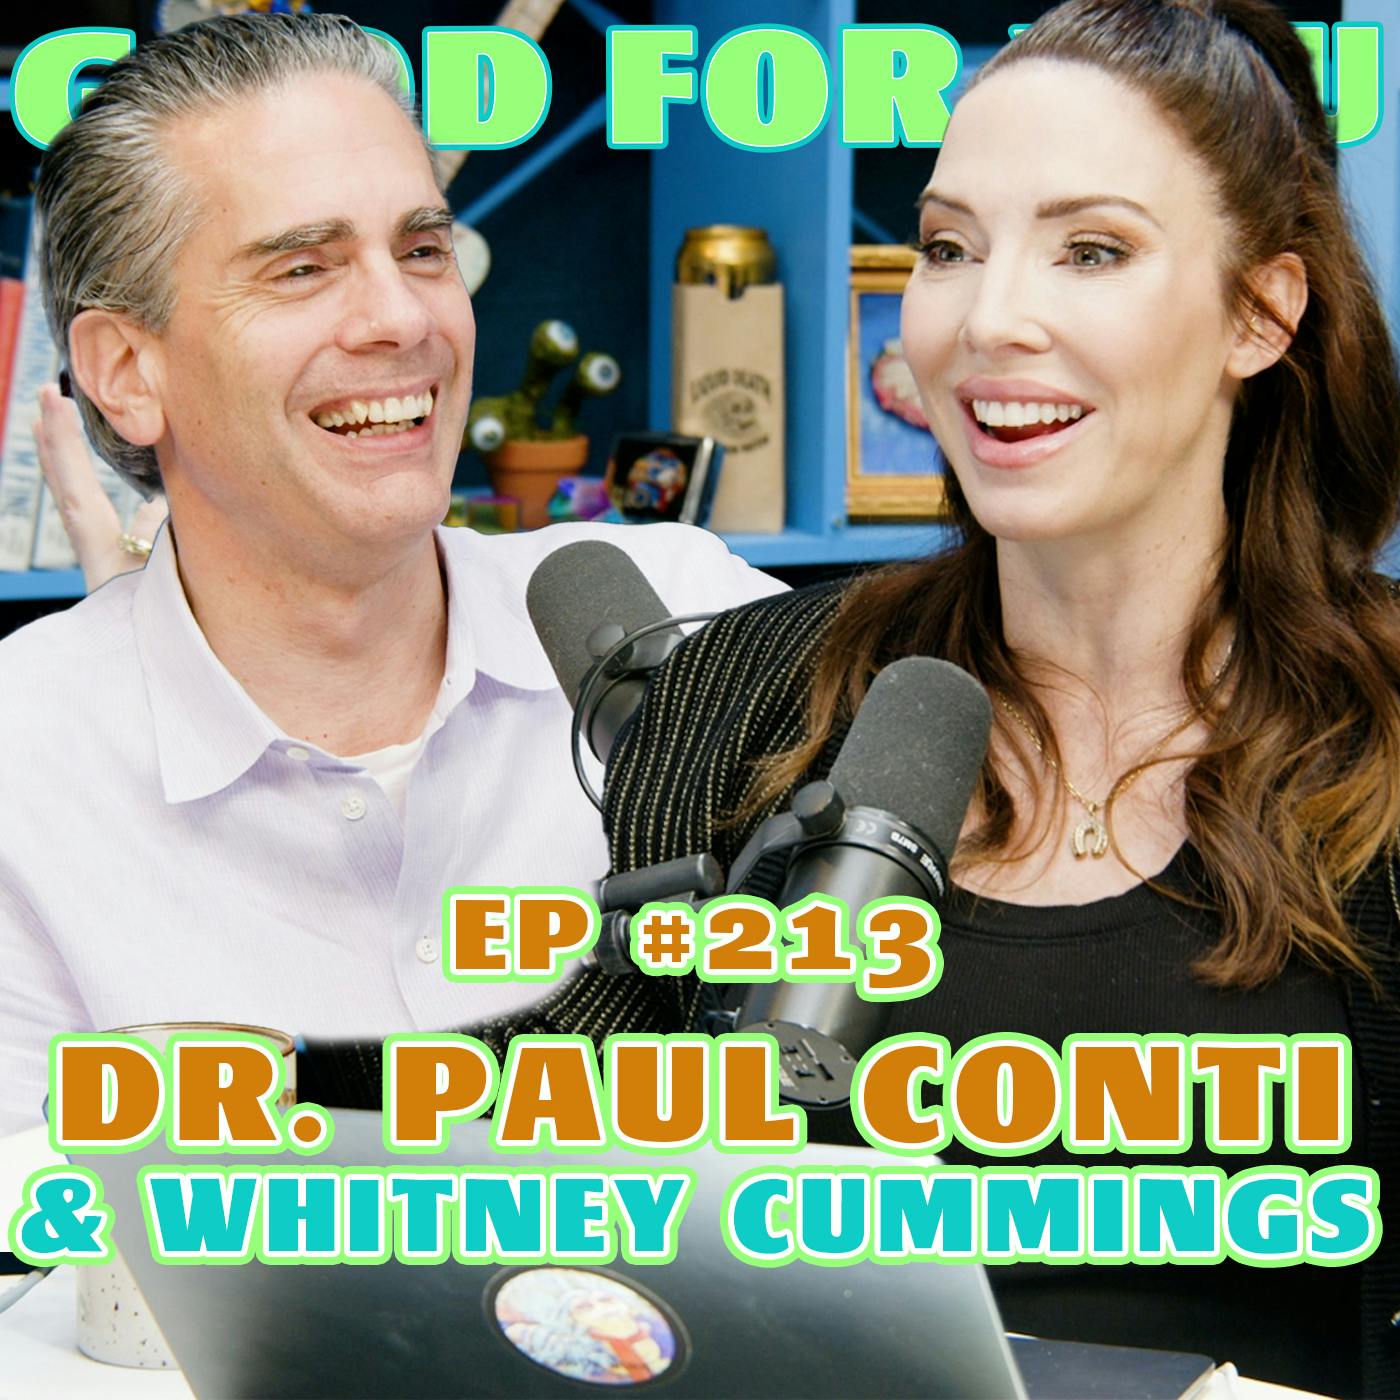 Good For You University - Dr. Paul Conti